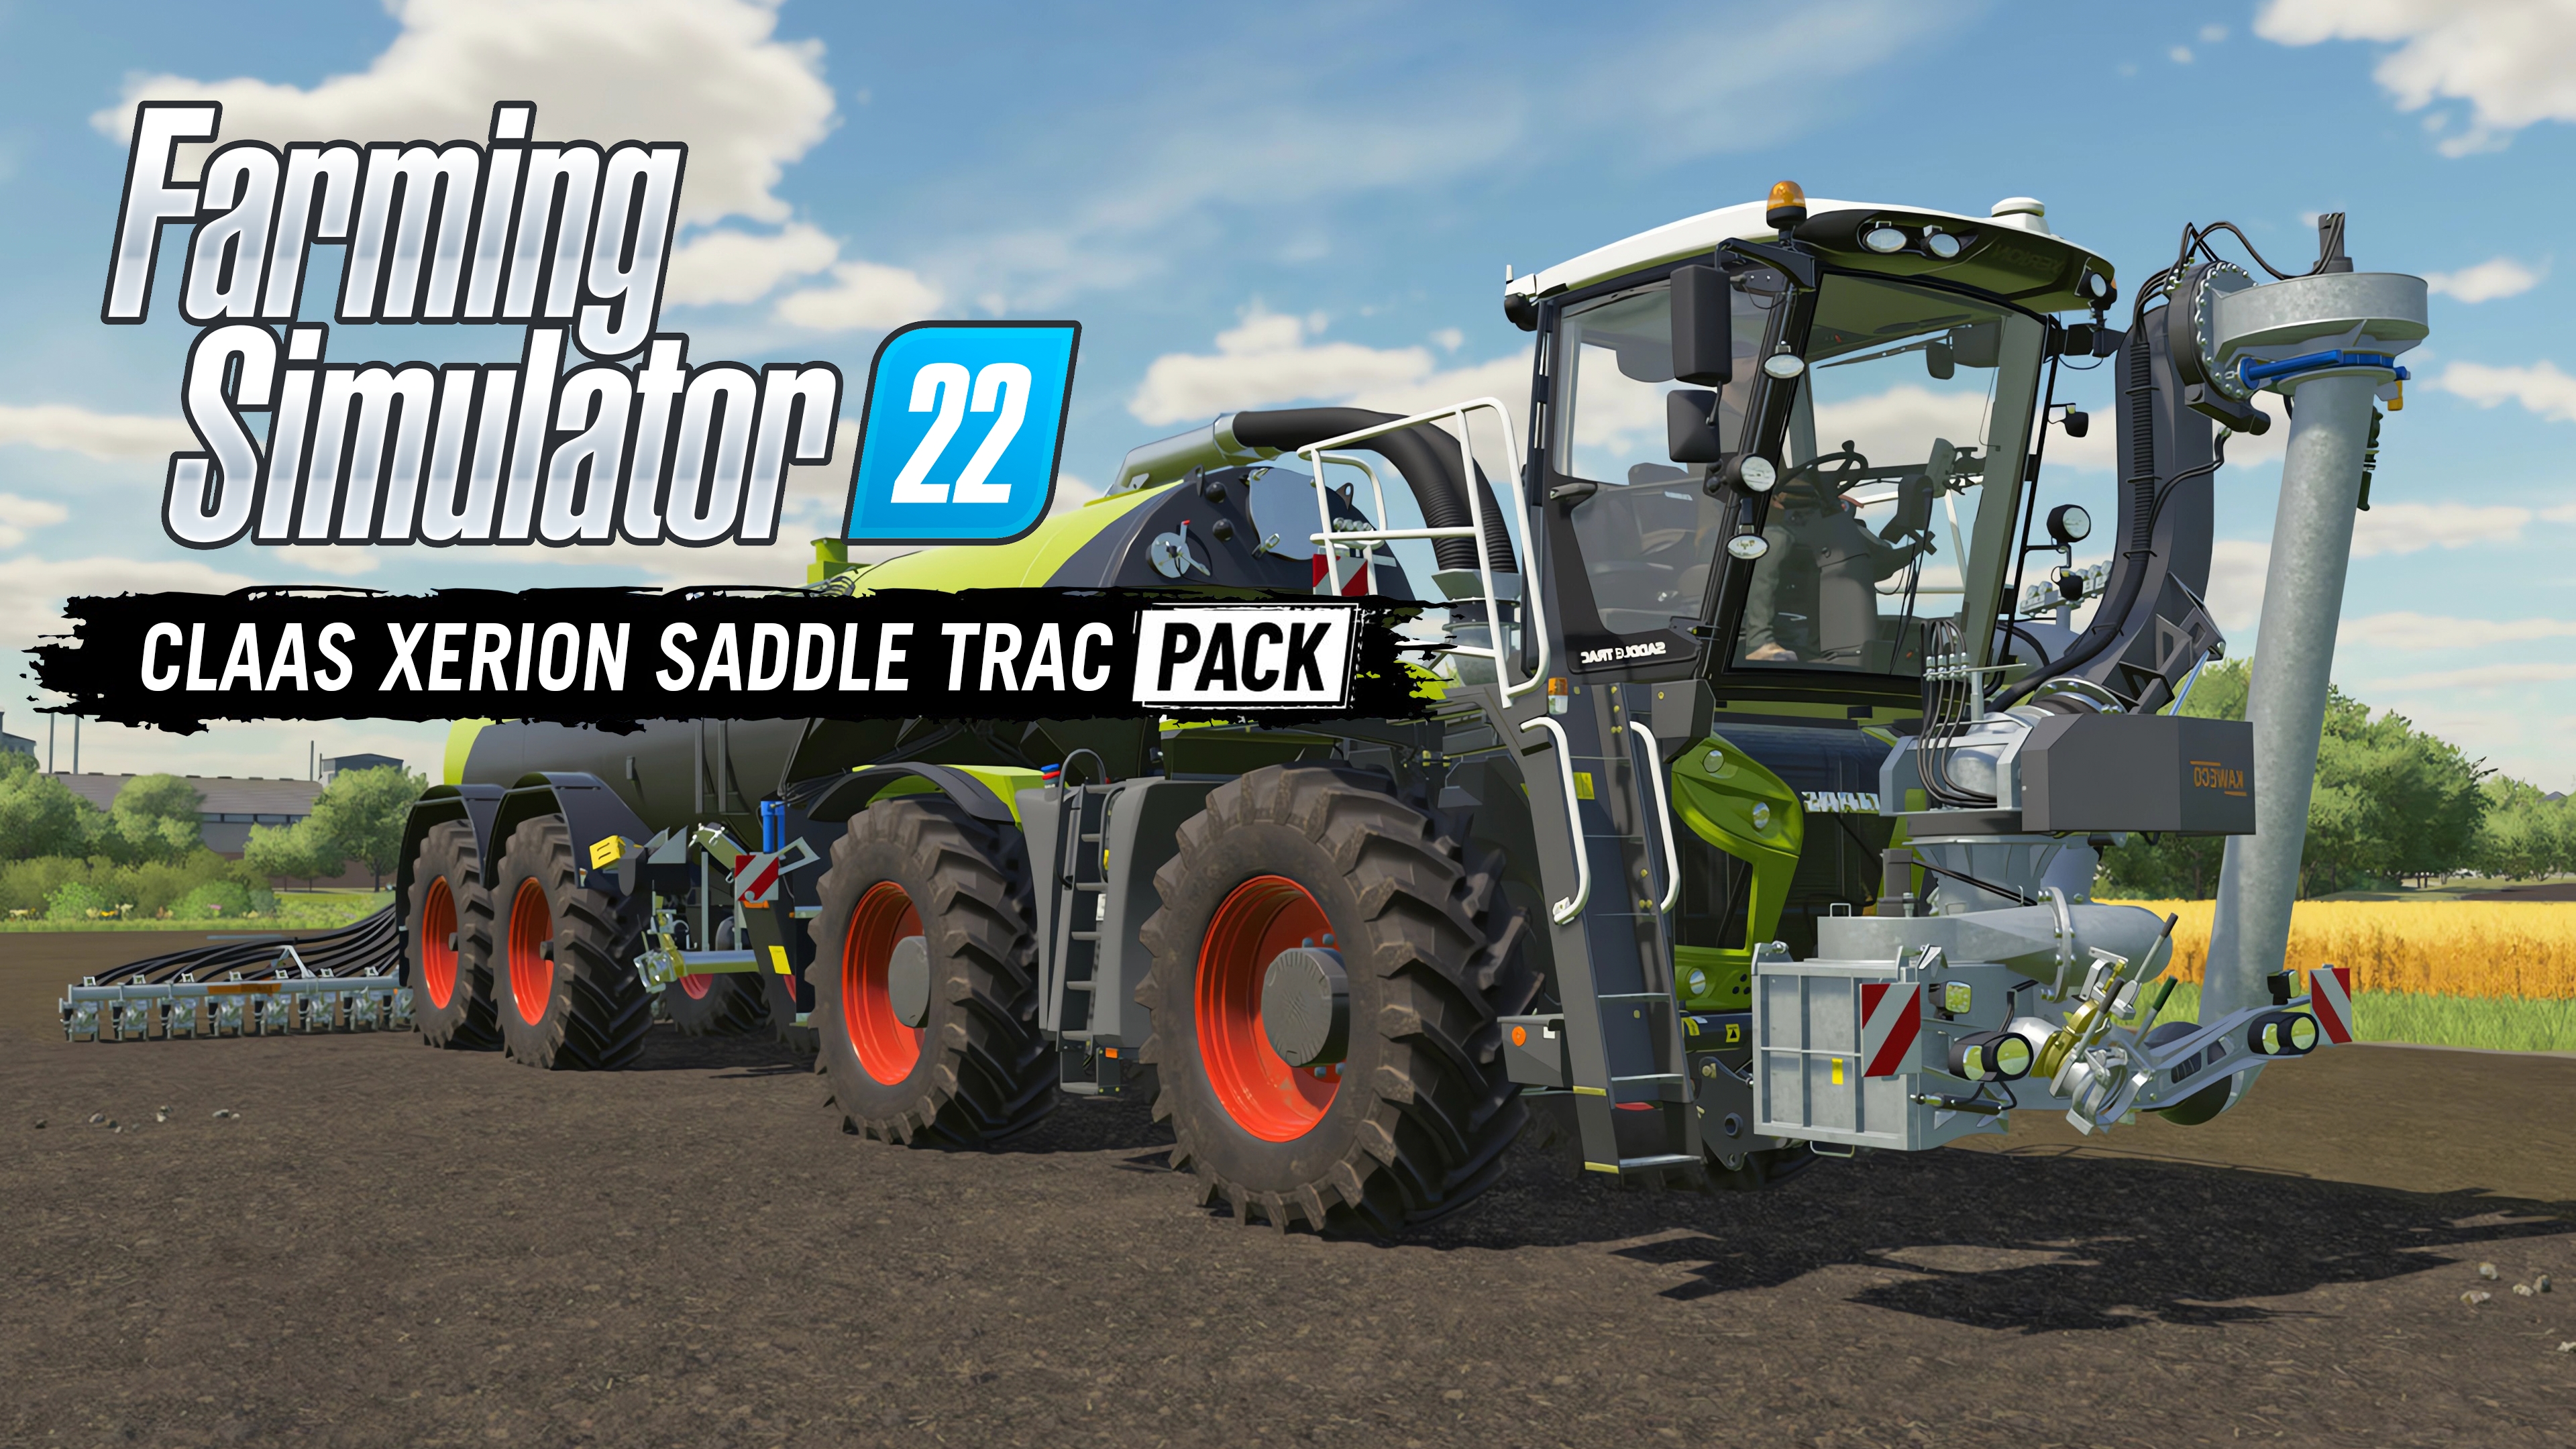 Farming Simulator 22 - Premium Edition  Download and Buy Today - Epic  Games Store